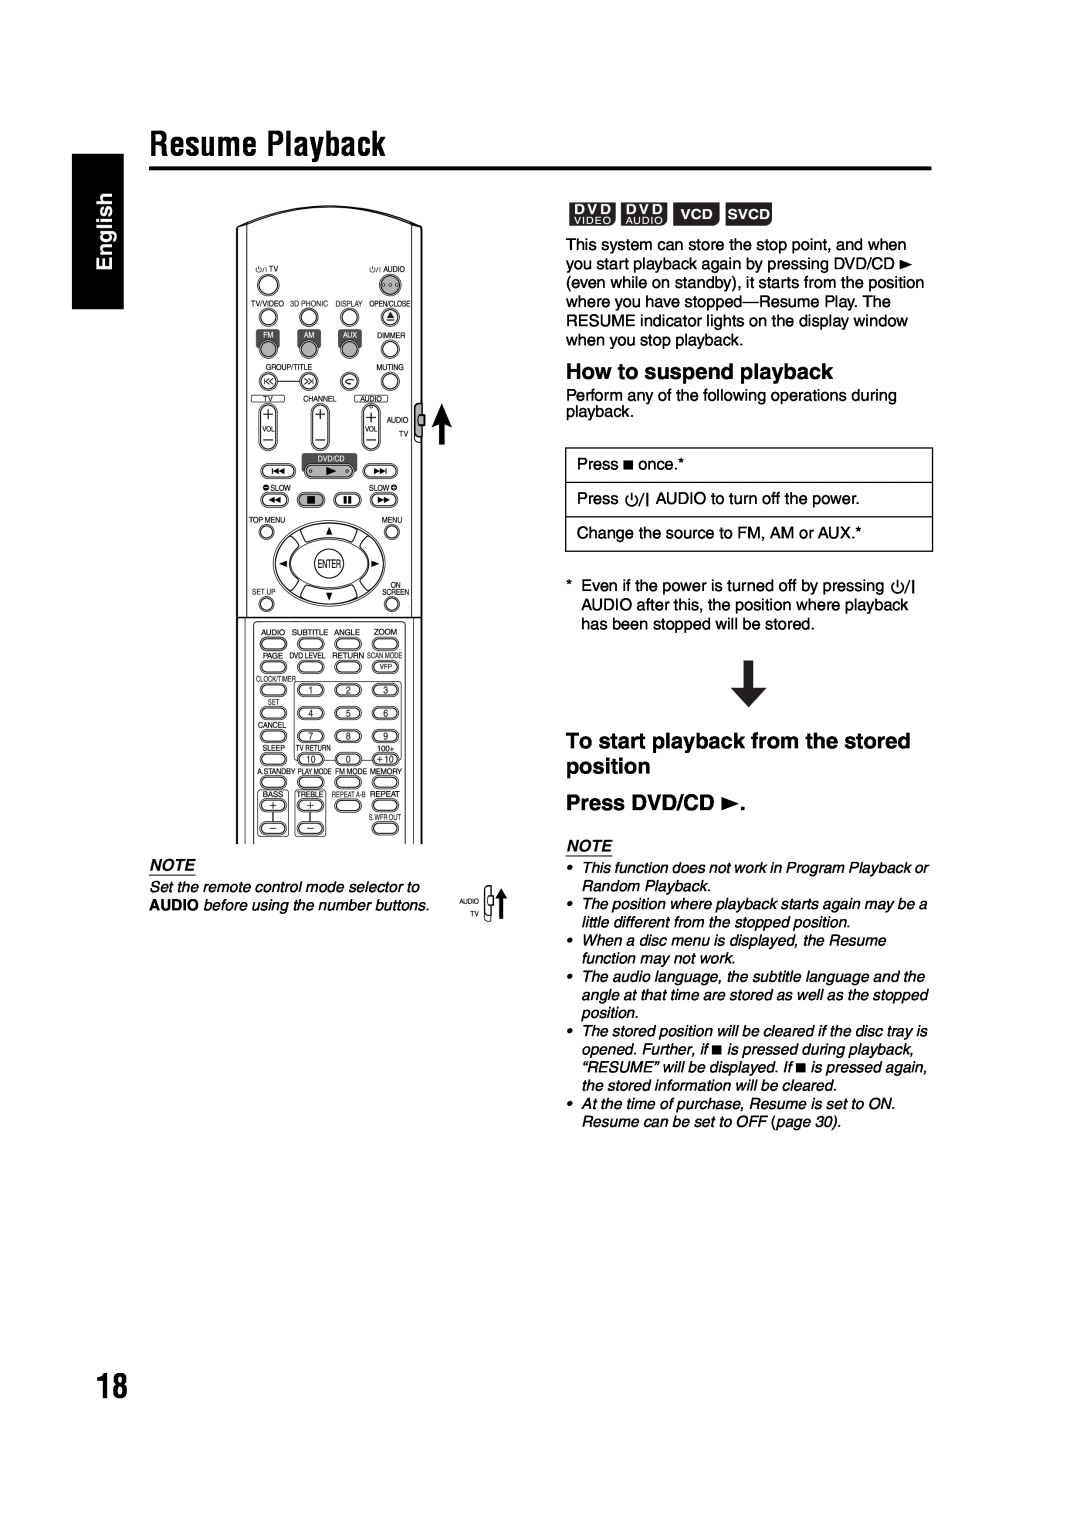 JVC GVT0142-001A manual Resume Playback, English, How to suspend playback, To start playback from the stored position 